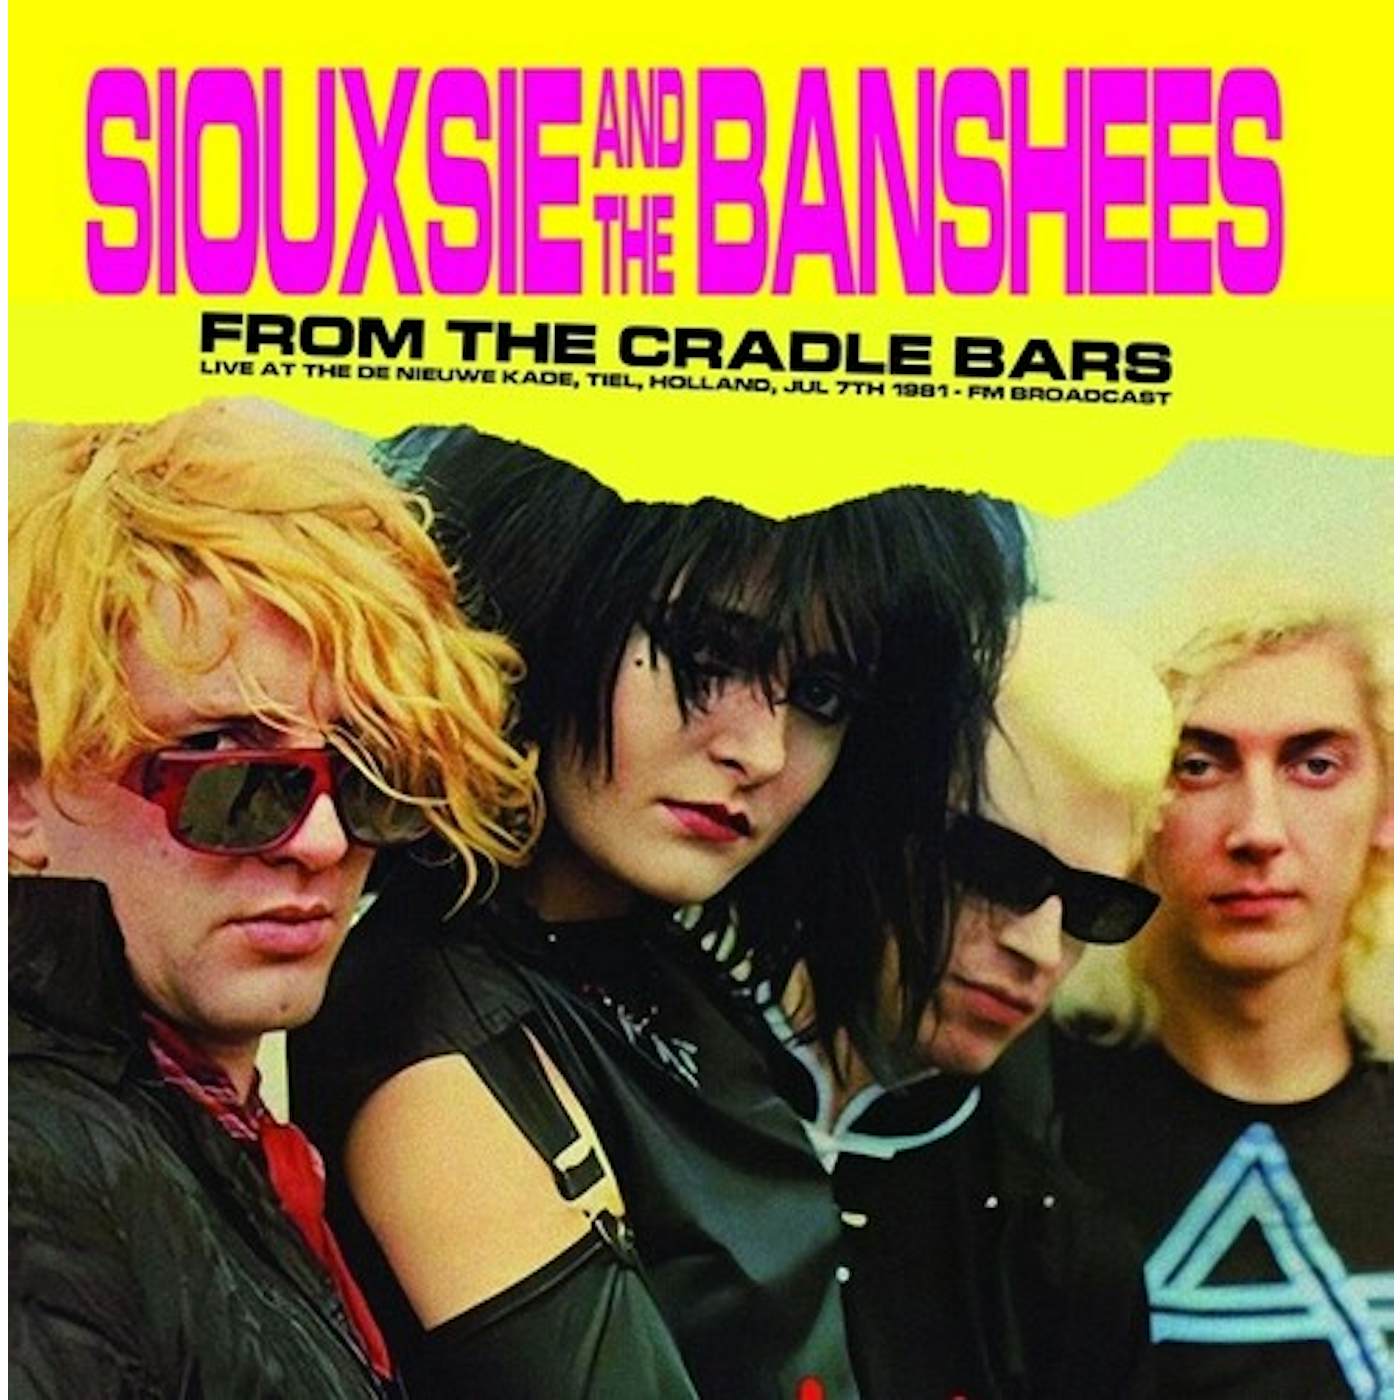 Siouxsie and the Banshees FROM THE CRADLE BARS: LIVE AT THE DE NIEUWE KADE Vinyl Record